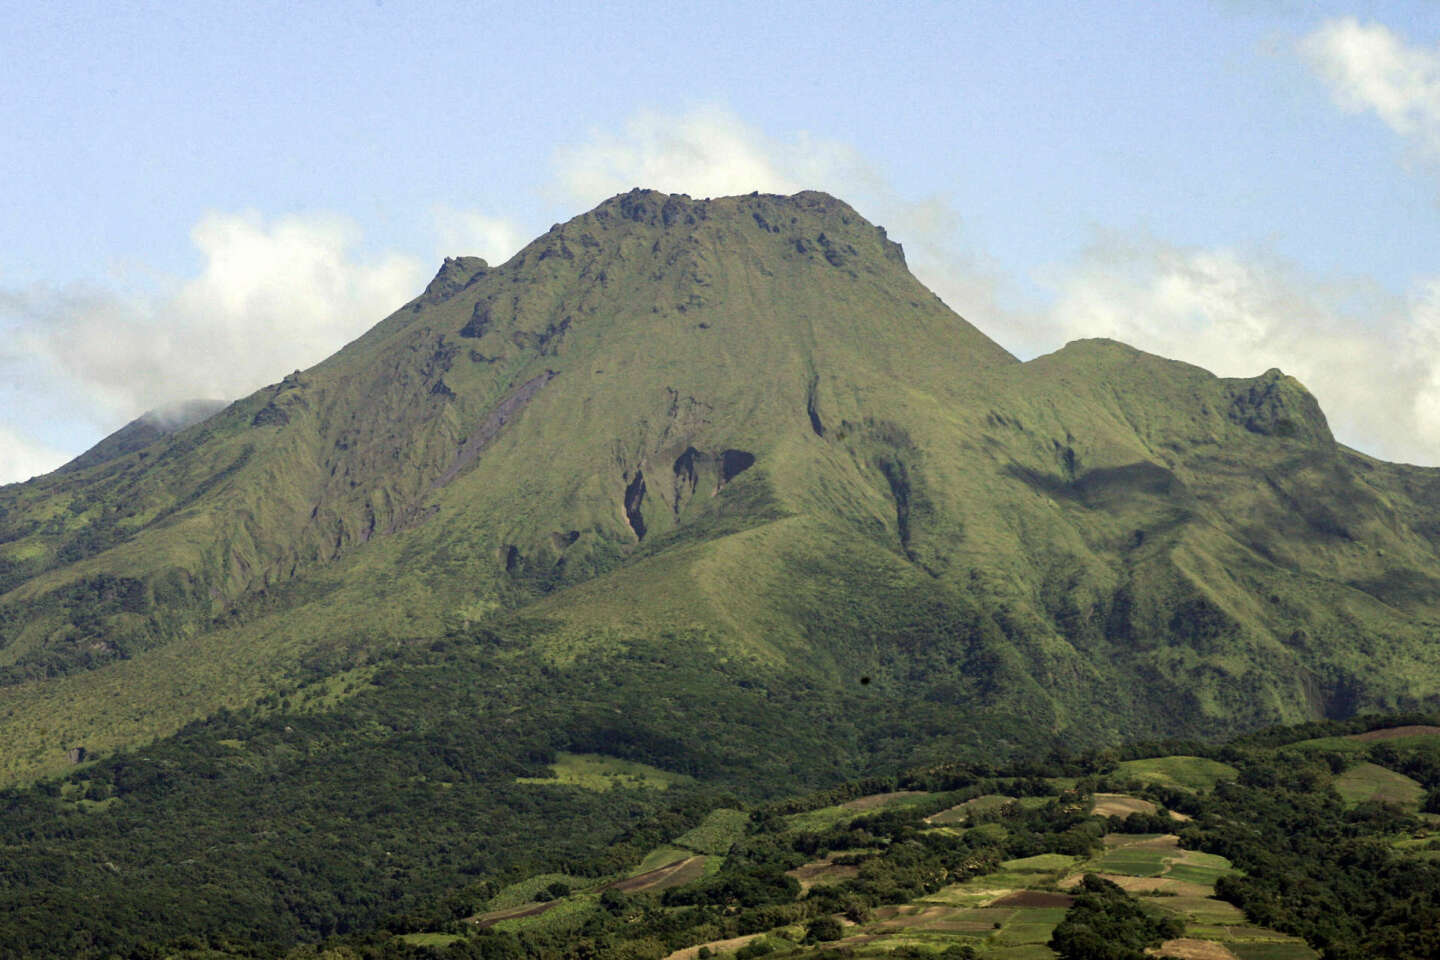 In Martinique, Mount Pelée and other peaks in the north of the island are listed as UNESCO World Heritage Sites.